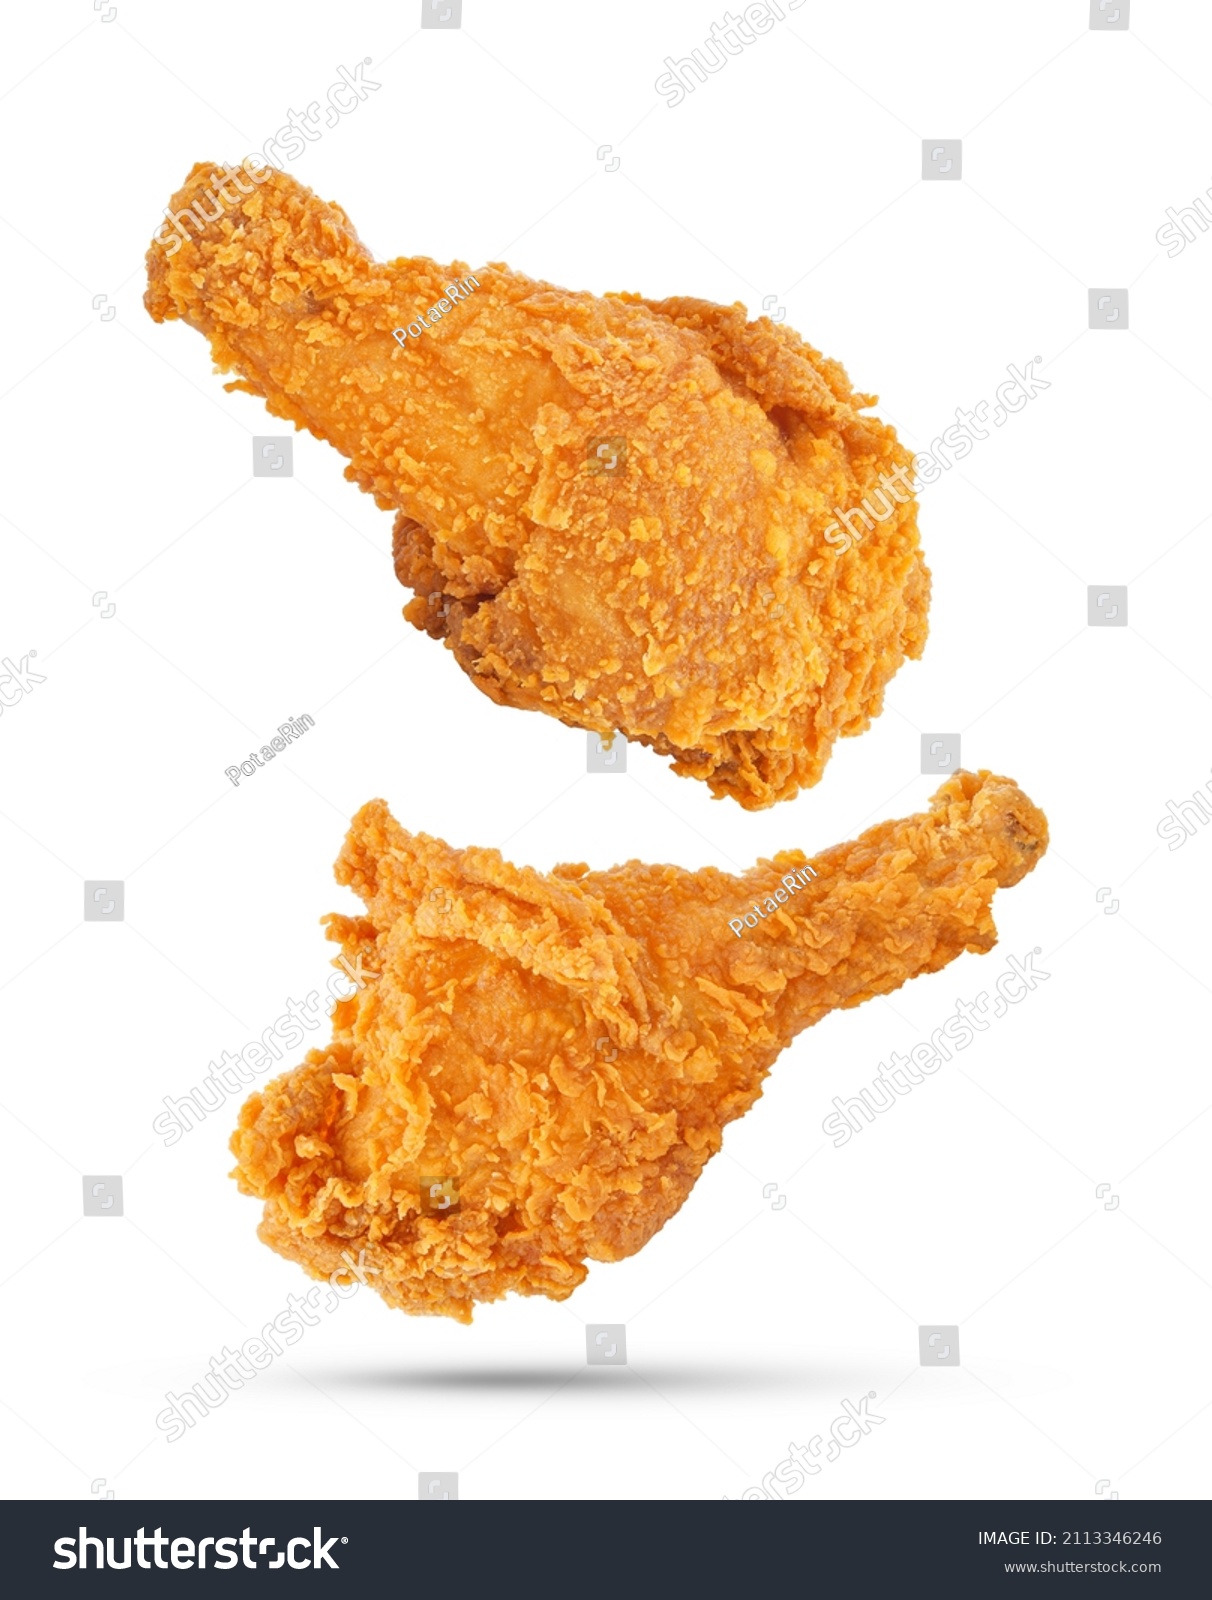 Fried chicken legs falling in the air isolated on white background. #2113346246